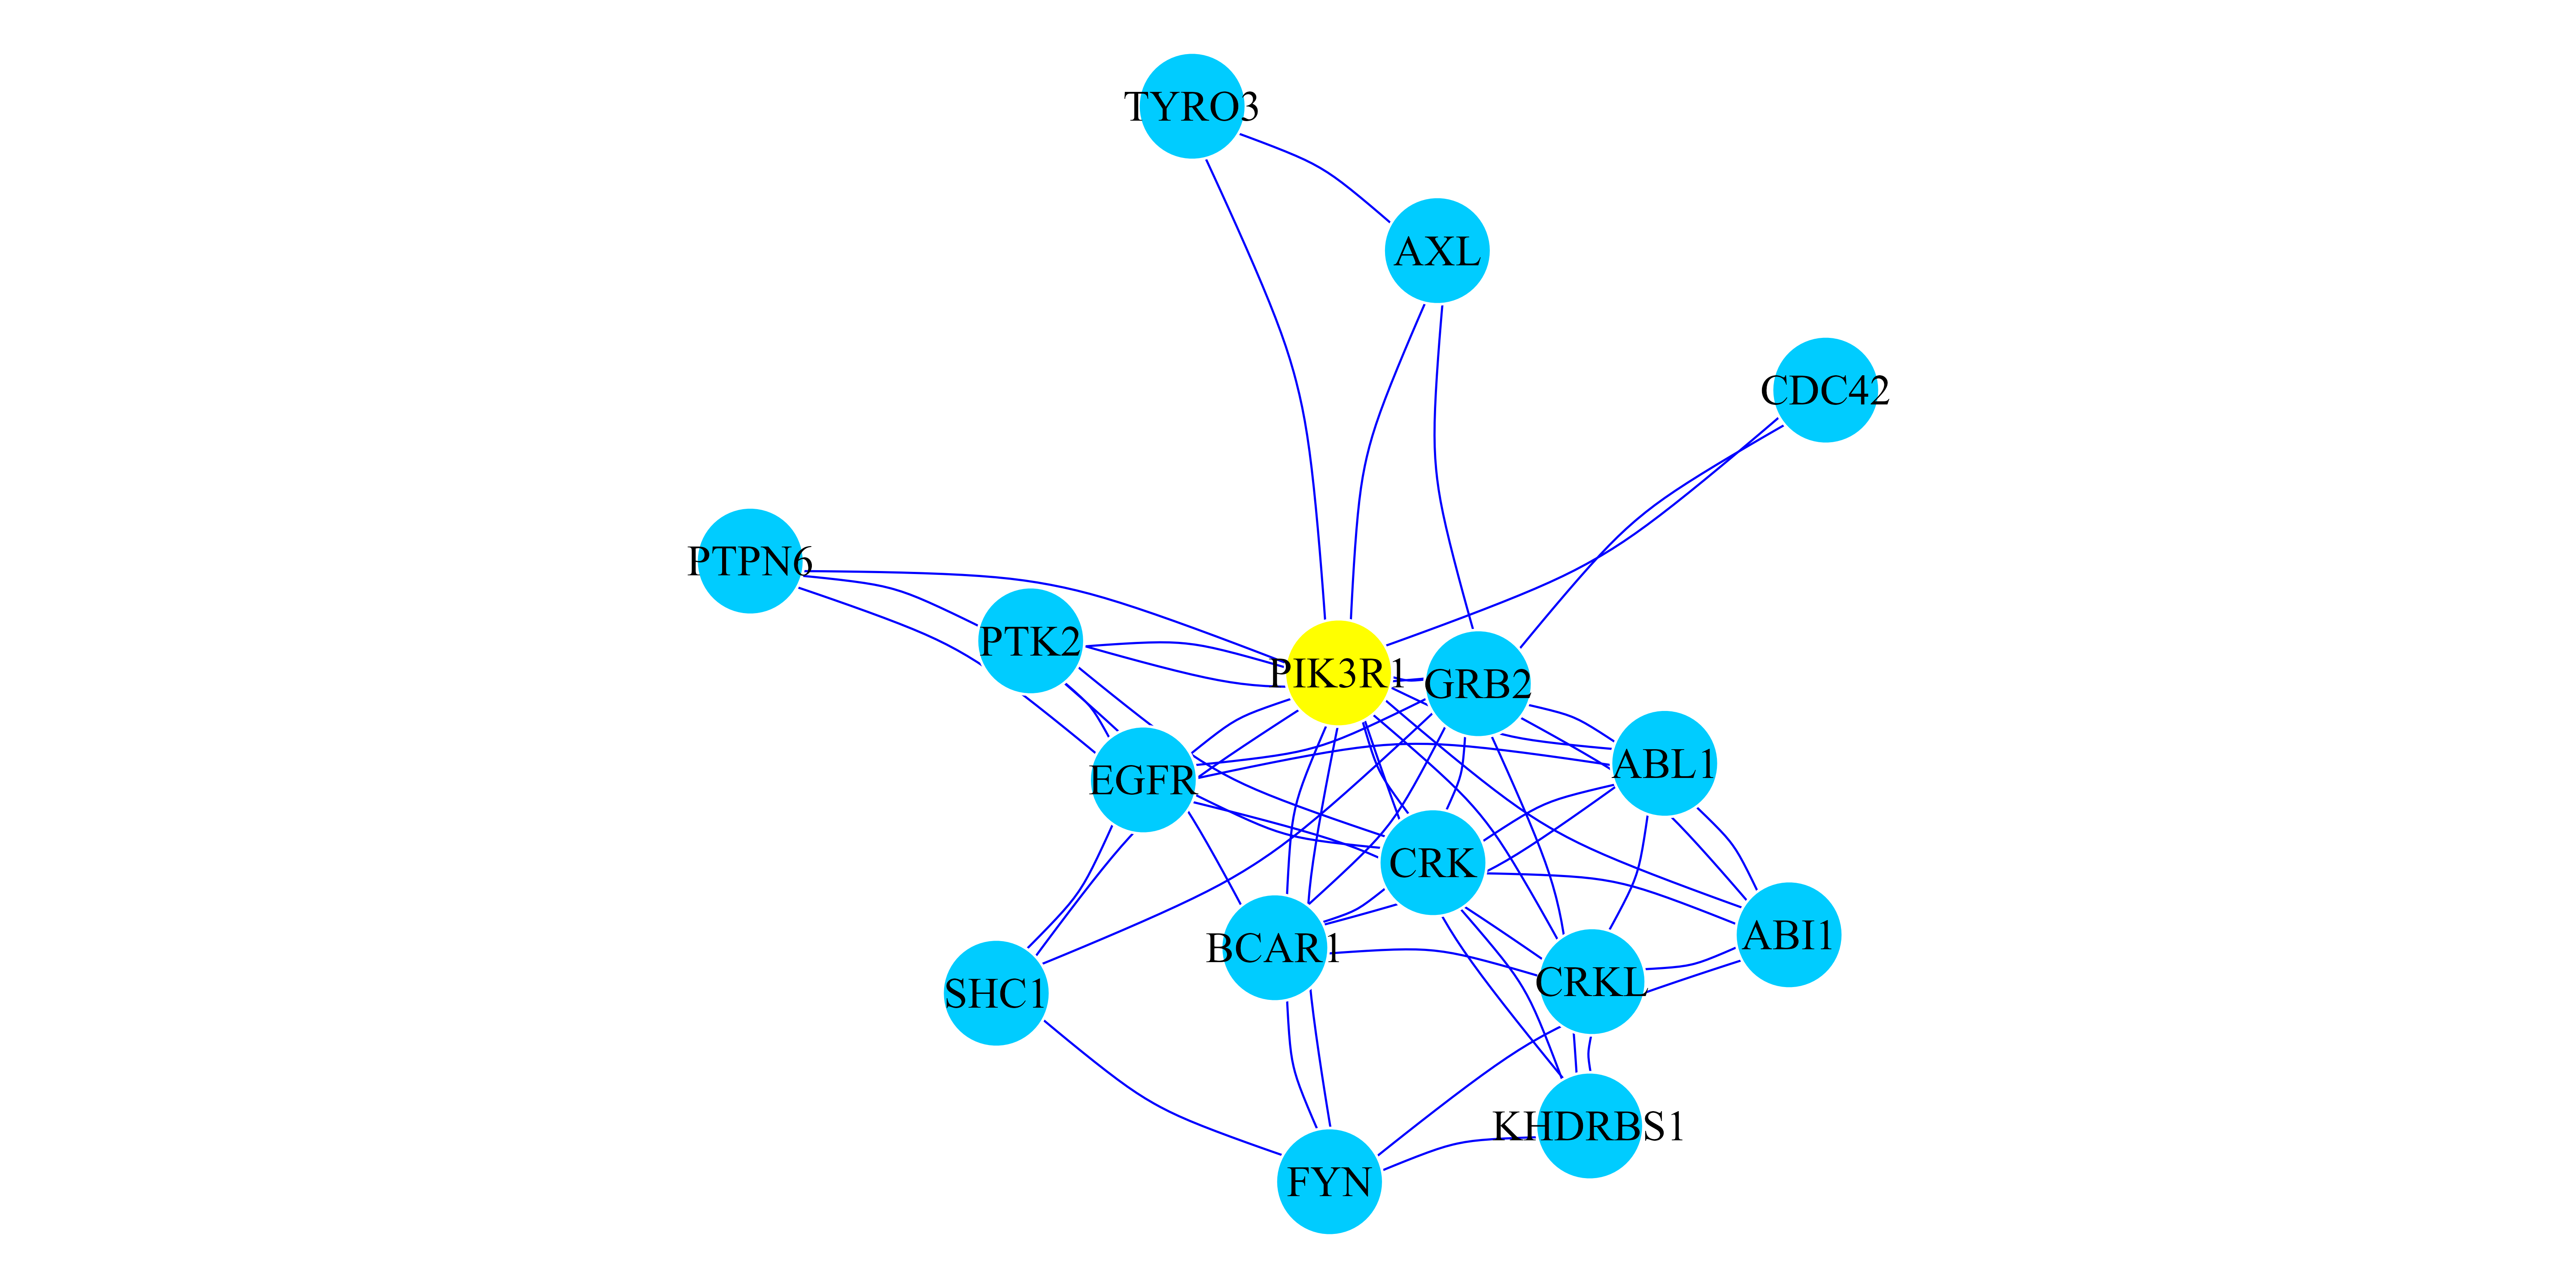 Figure 1: RWR on a monoplex PPI Network. Network representation of the top 15 ranked genes when the RWR algorithm is executed using the PIK3R1 gene as seed (yellow node). Blue edges represent PPI interactions.